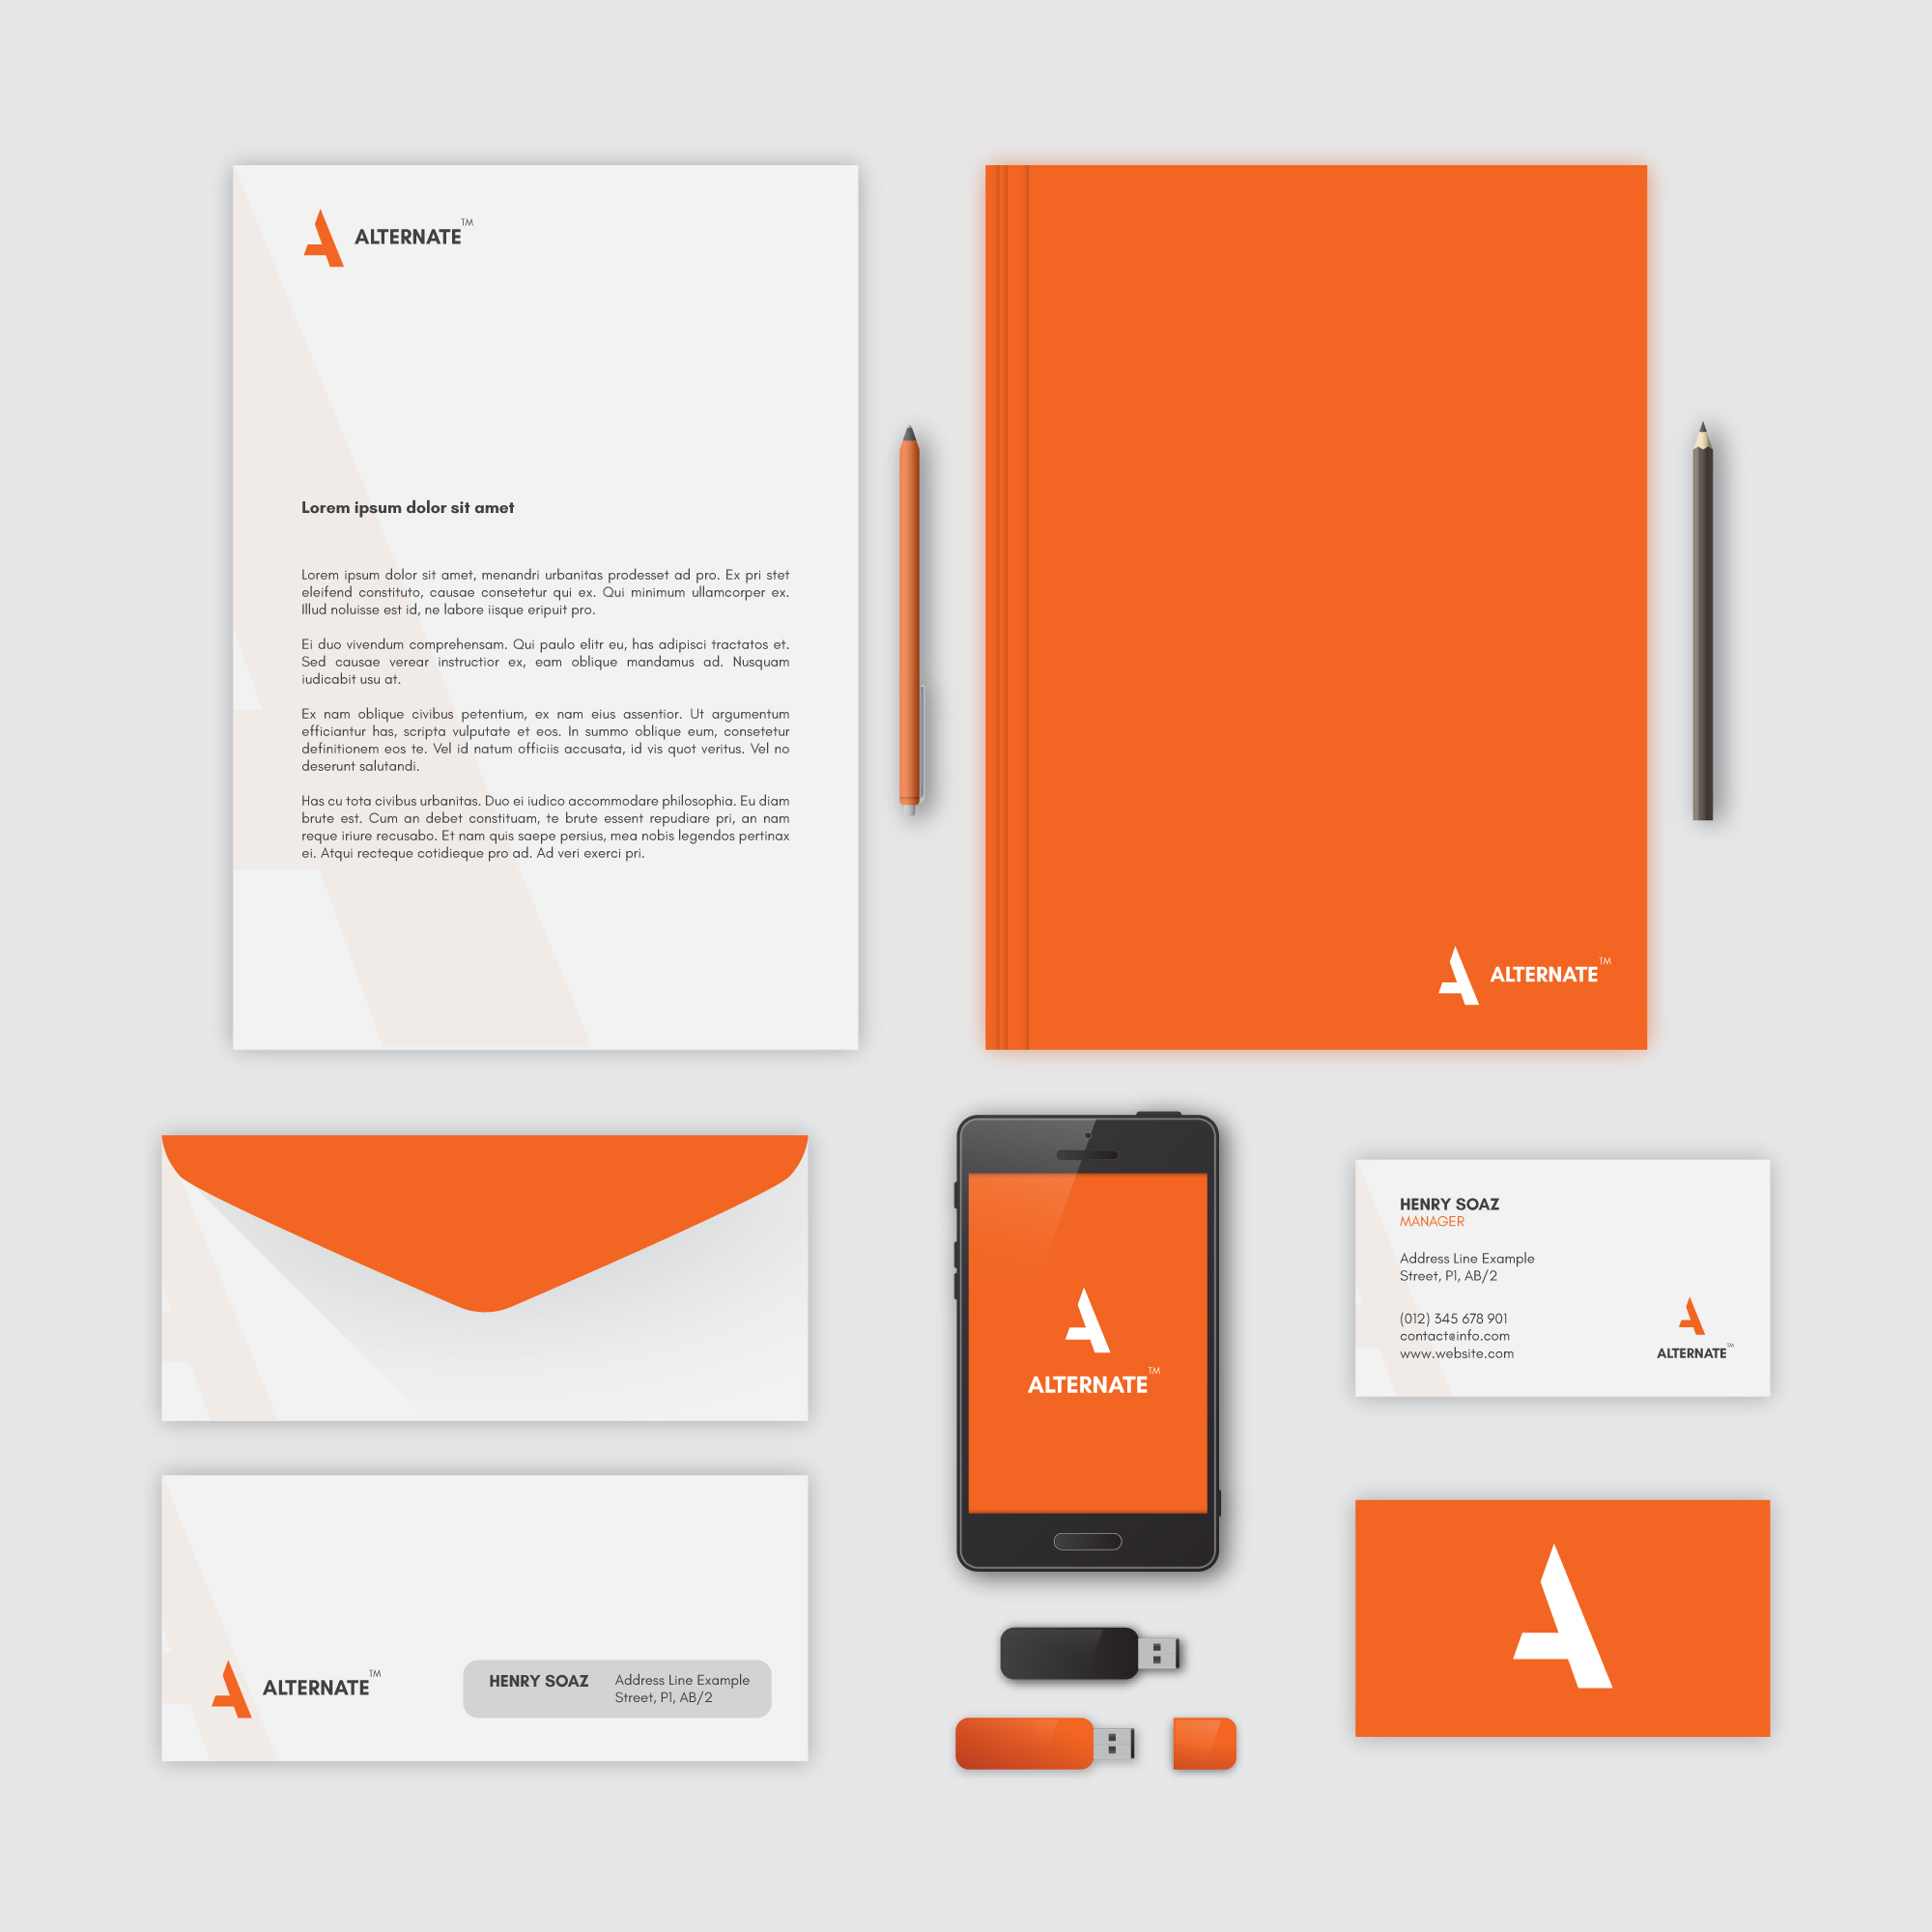 An image of corporate stationery branding